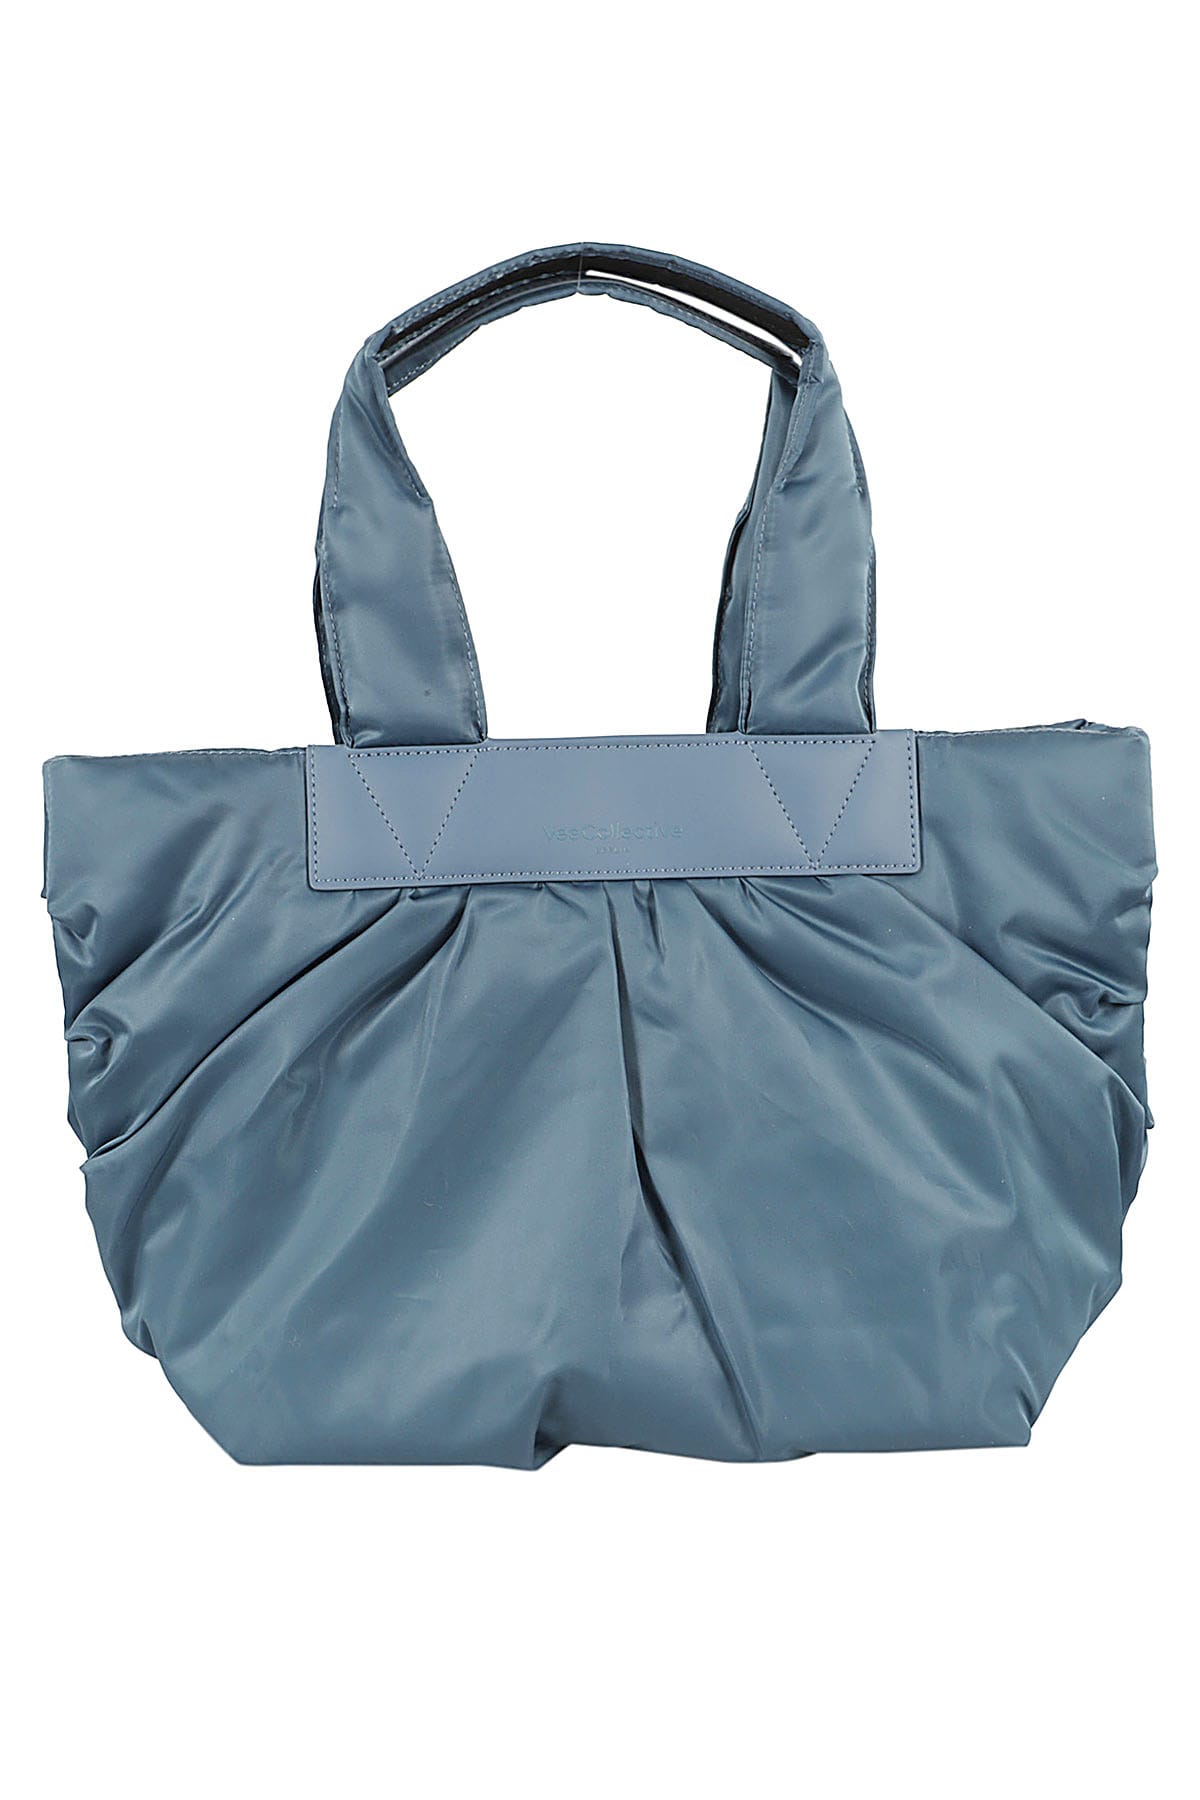 Veecollective Caba Tote Small In Bluefin Bluef